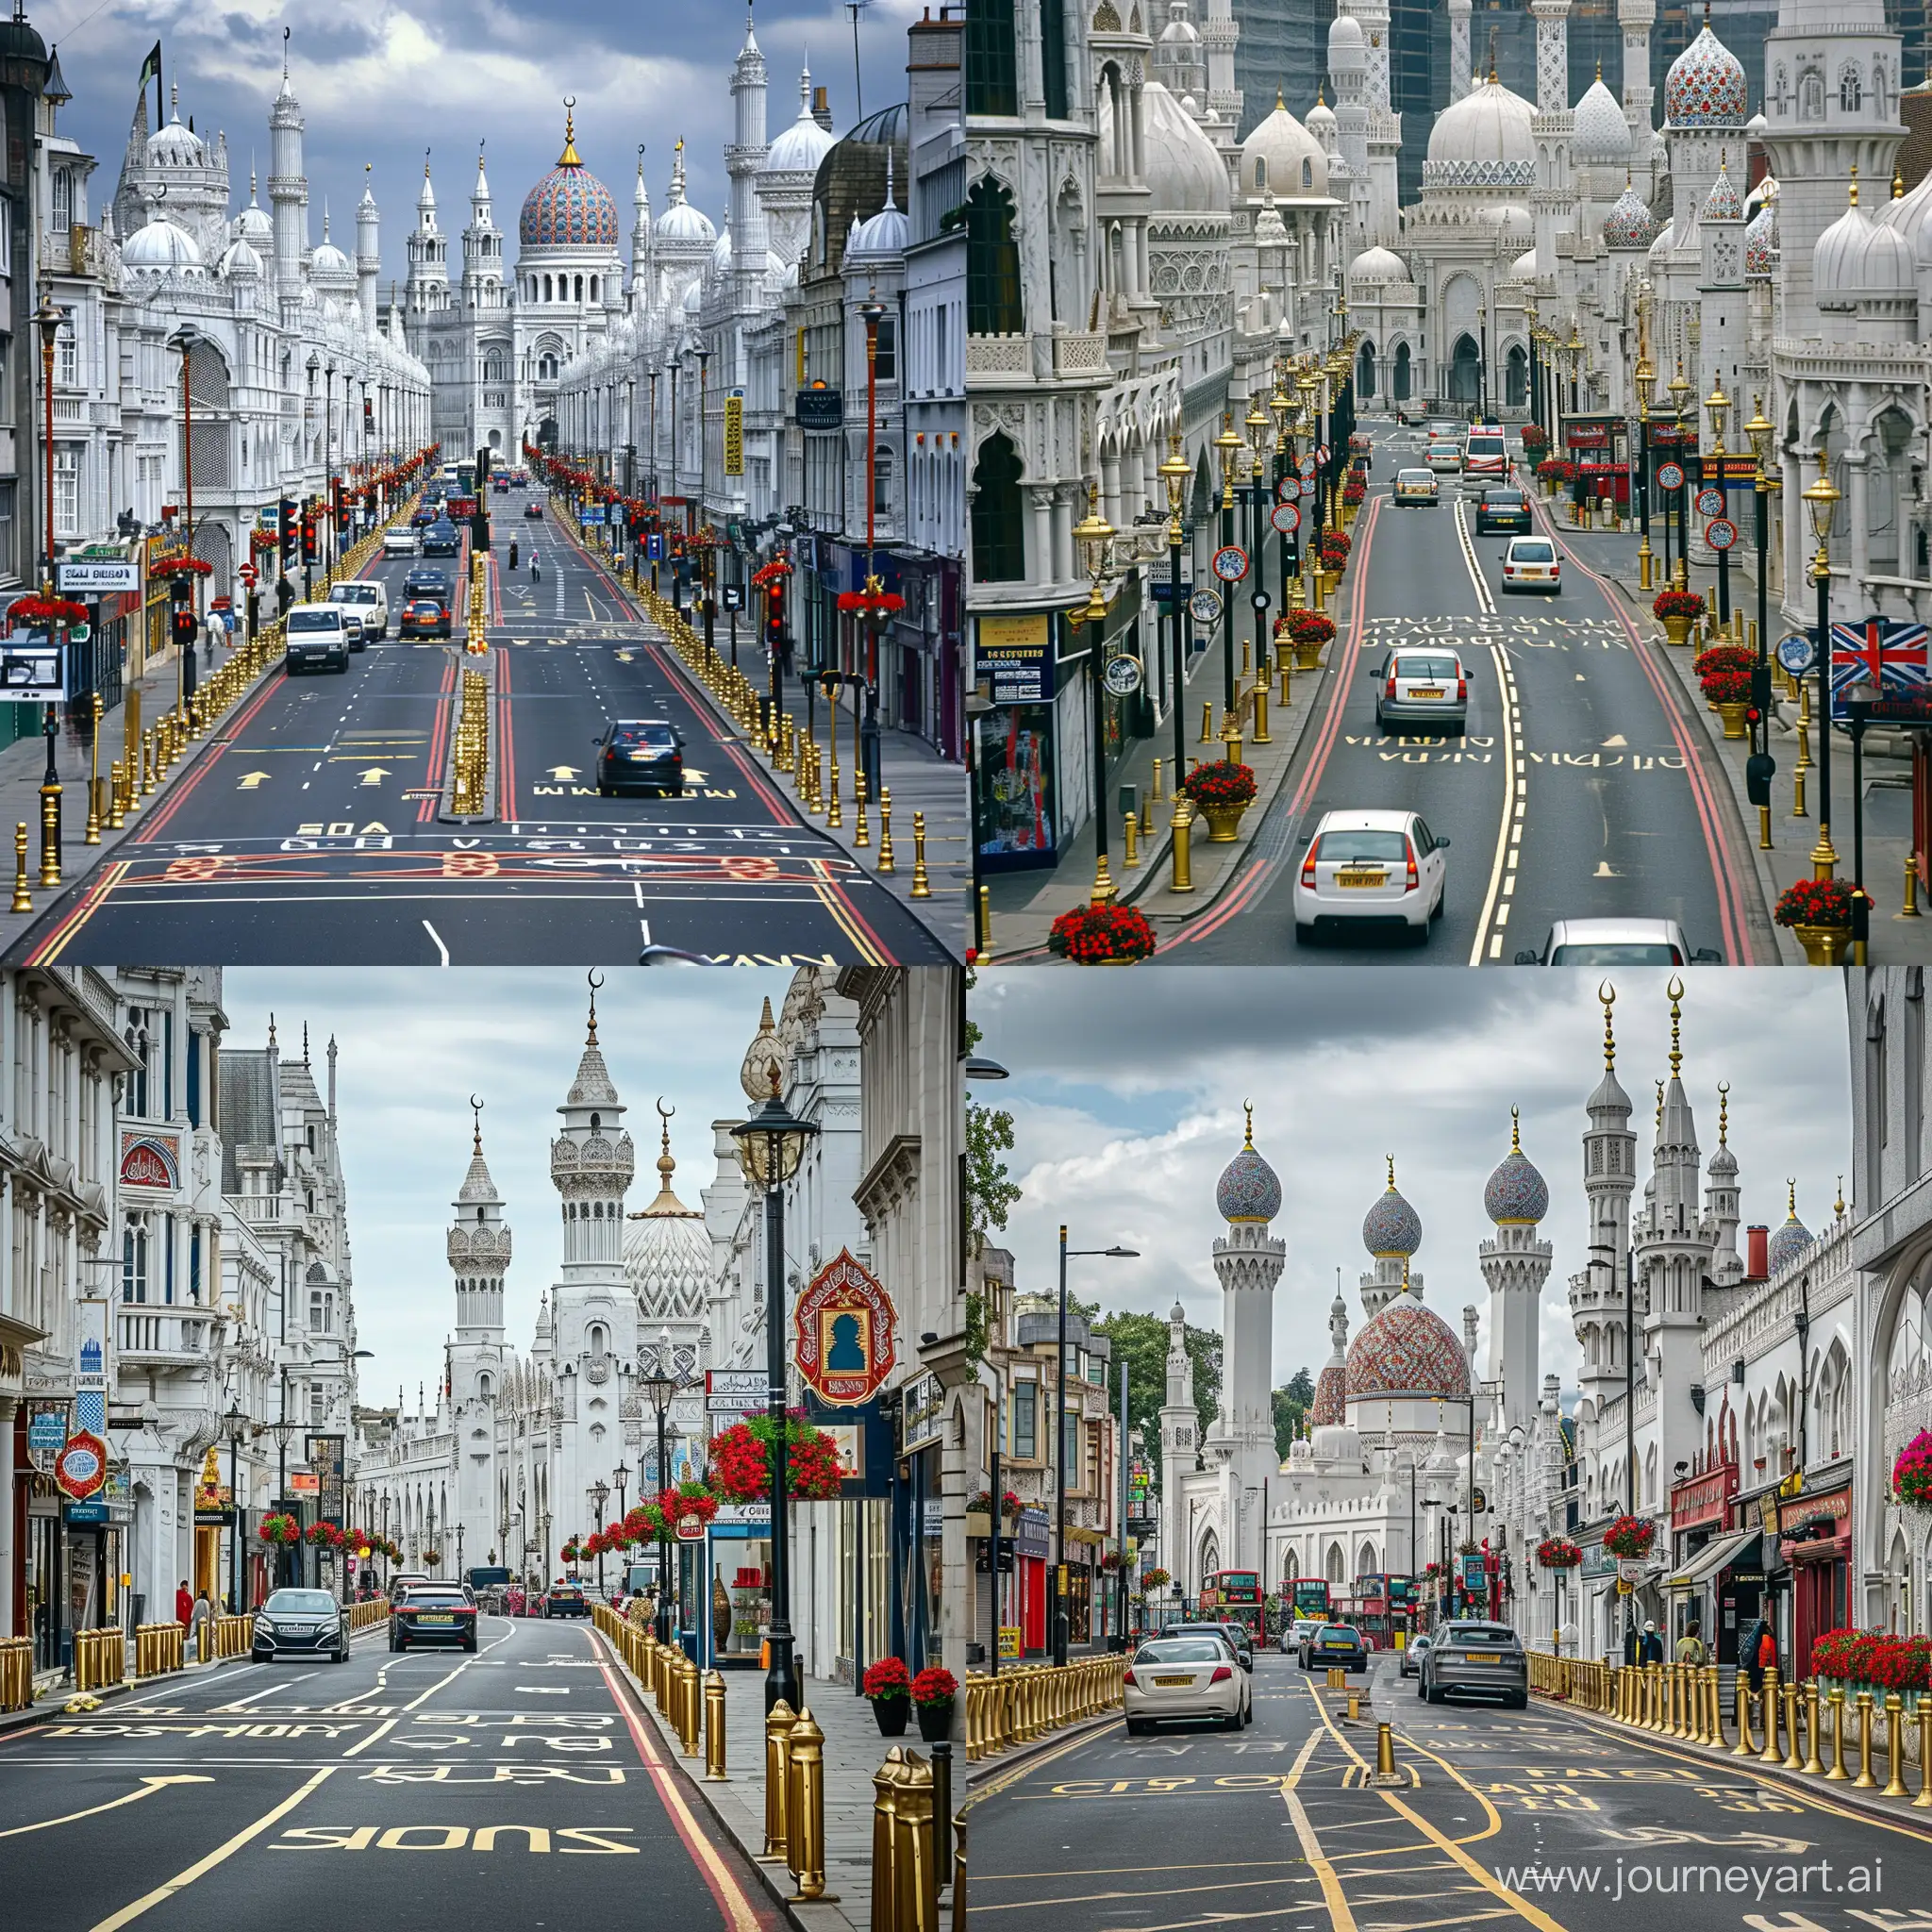 Photo: a London road of medieval islamic city, full of many white marbled Islamic architectures and mosques having red blue arabesque and persian tile floral motifs on facades, London styled road markings and busy traffic, golden bollarded sidewalks lined with shops and stores, islamic ornamented street lights, traffic signs, red green flowers --v 6